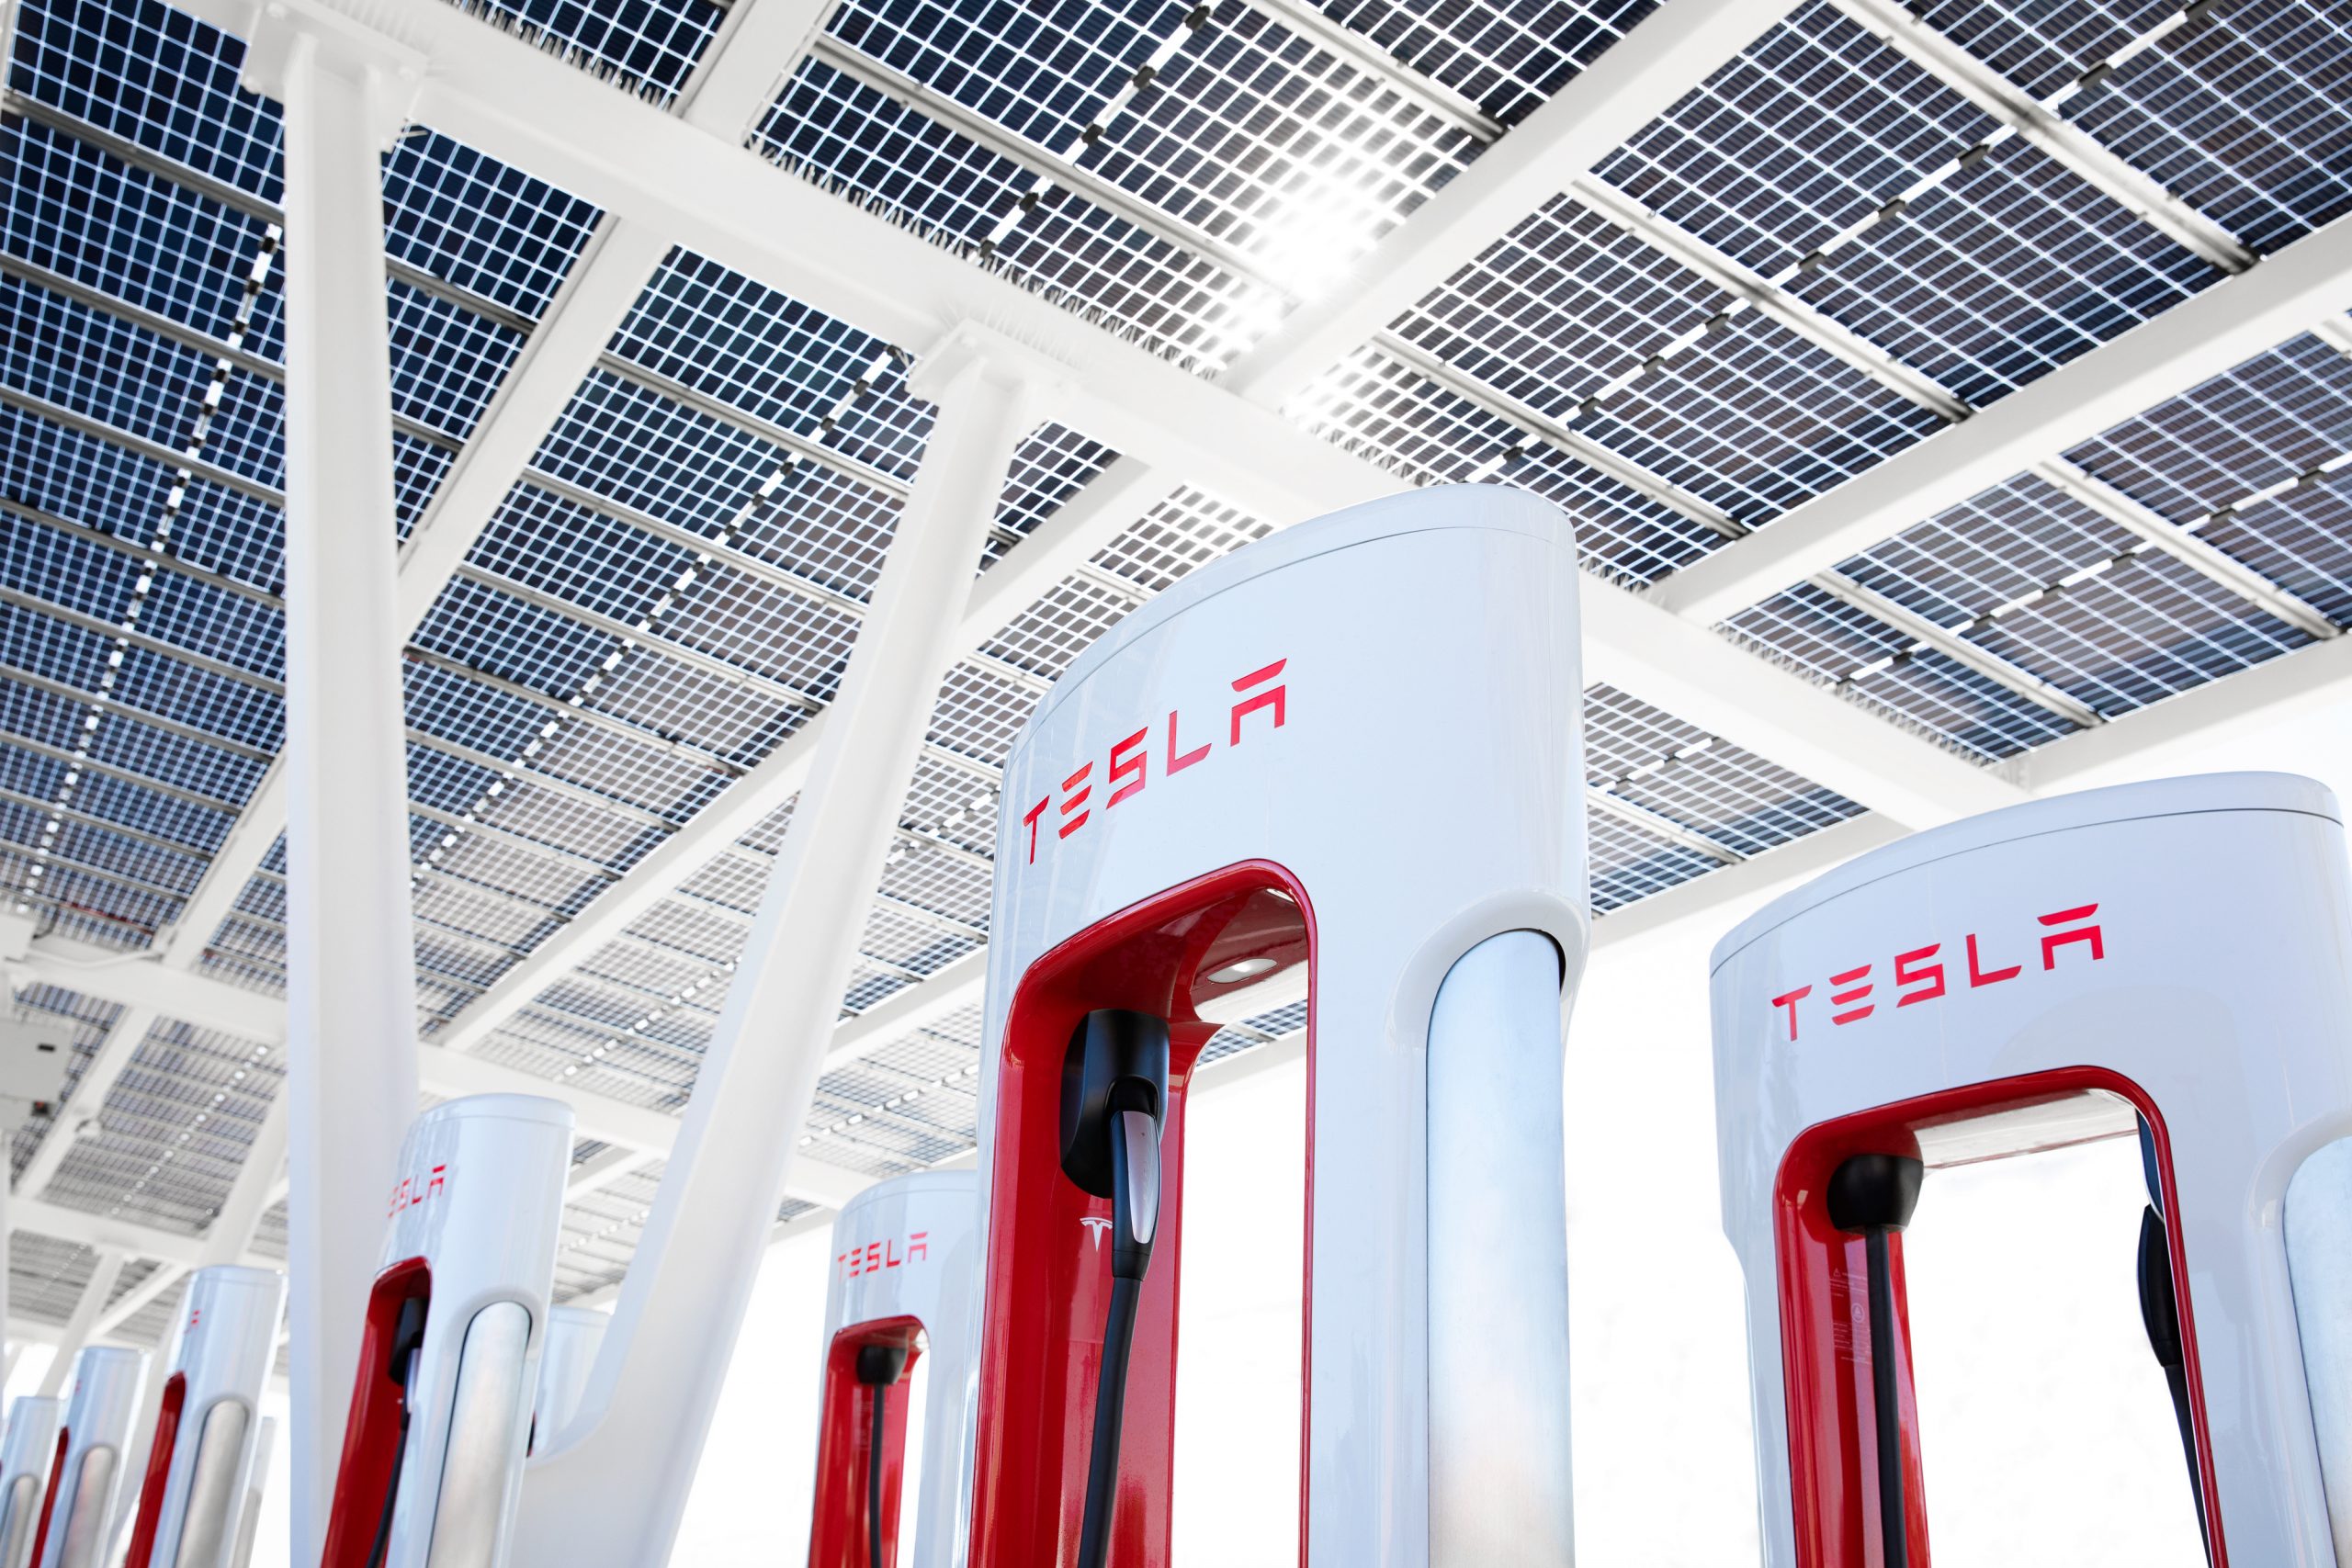 Tesla’s NACS connector gains support from CharIN but admits it must go through due process